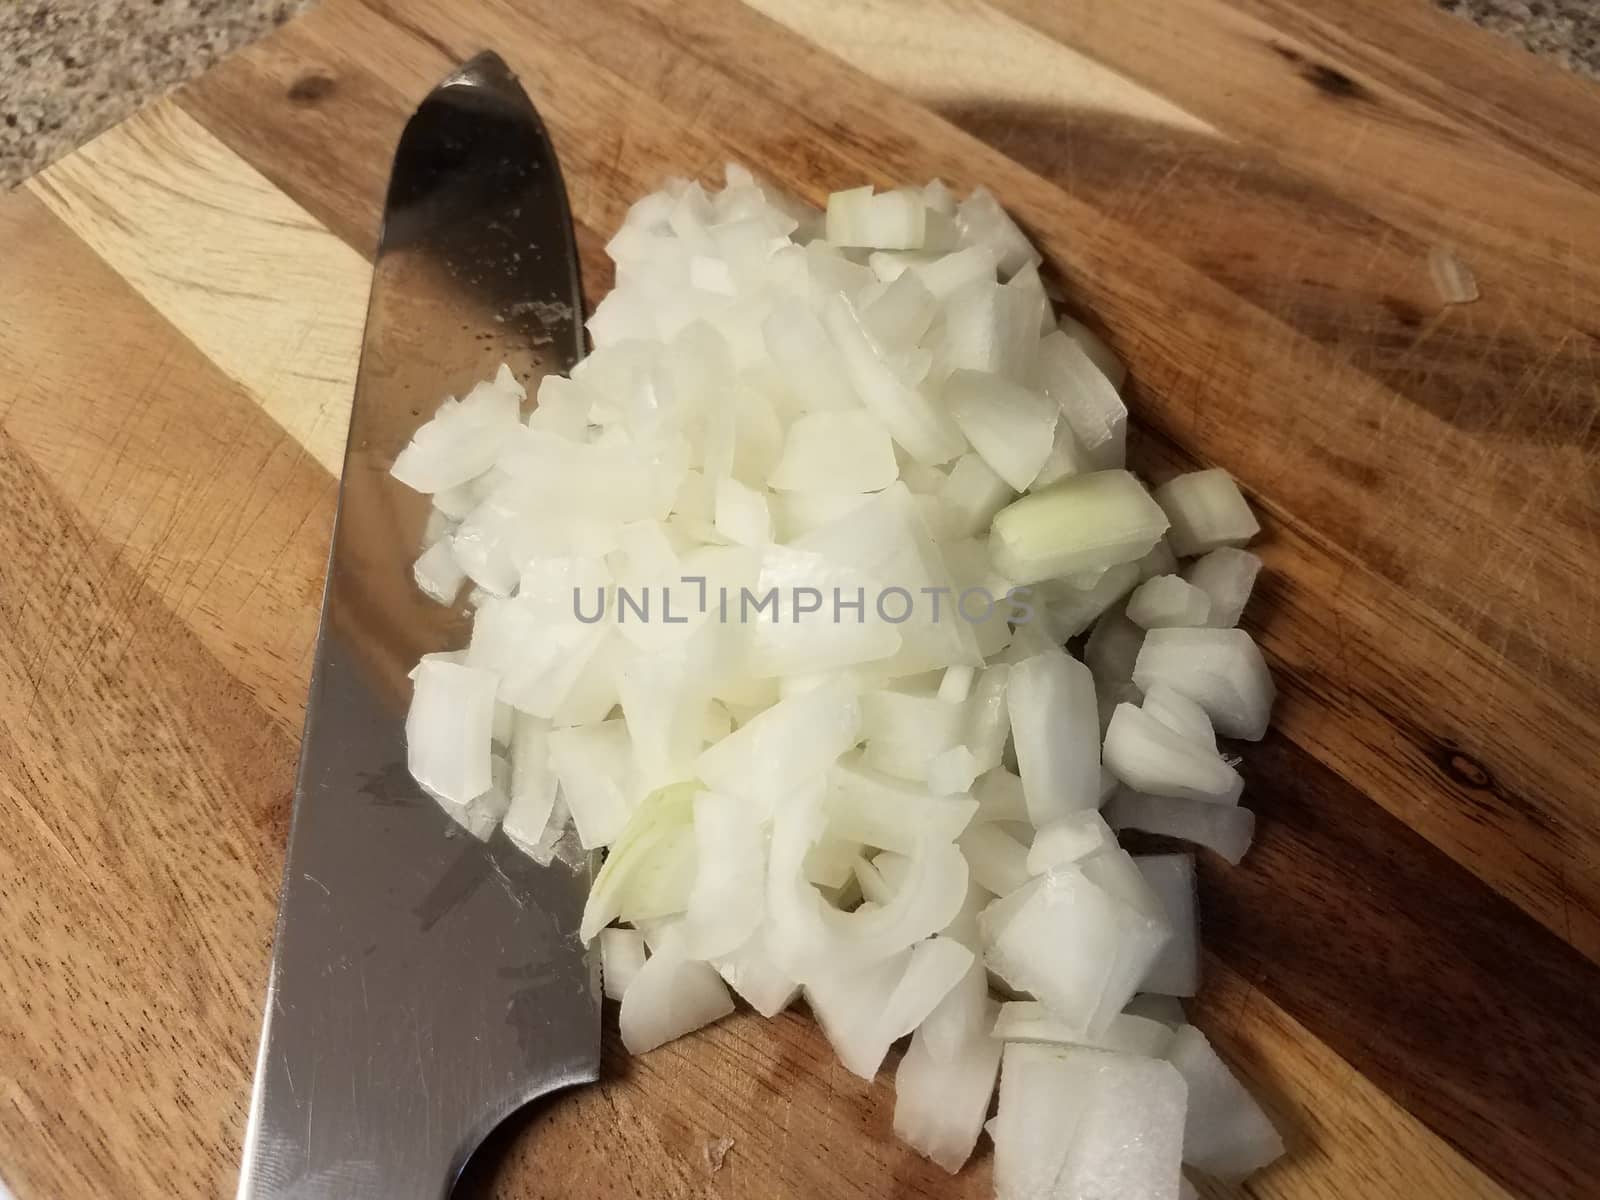 knife on wood cutting board with white onions by stockphotofan1